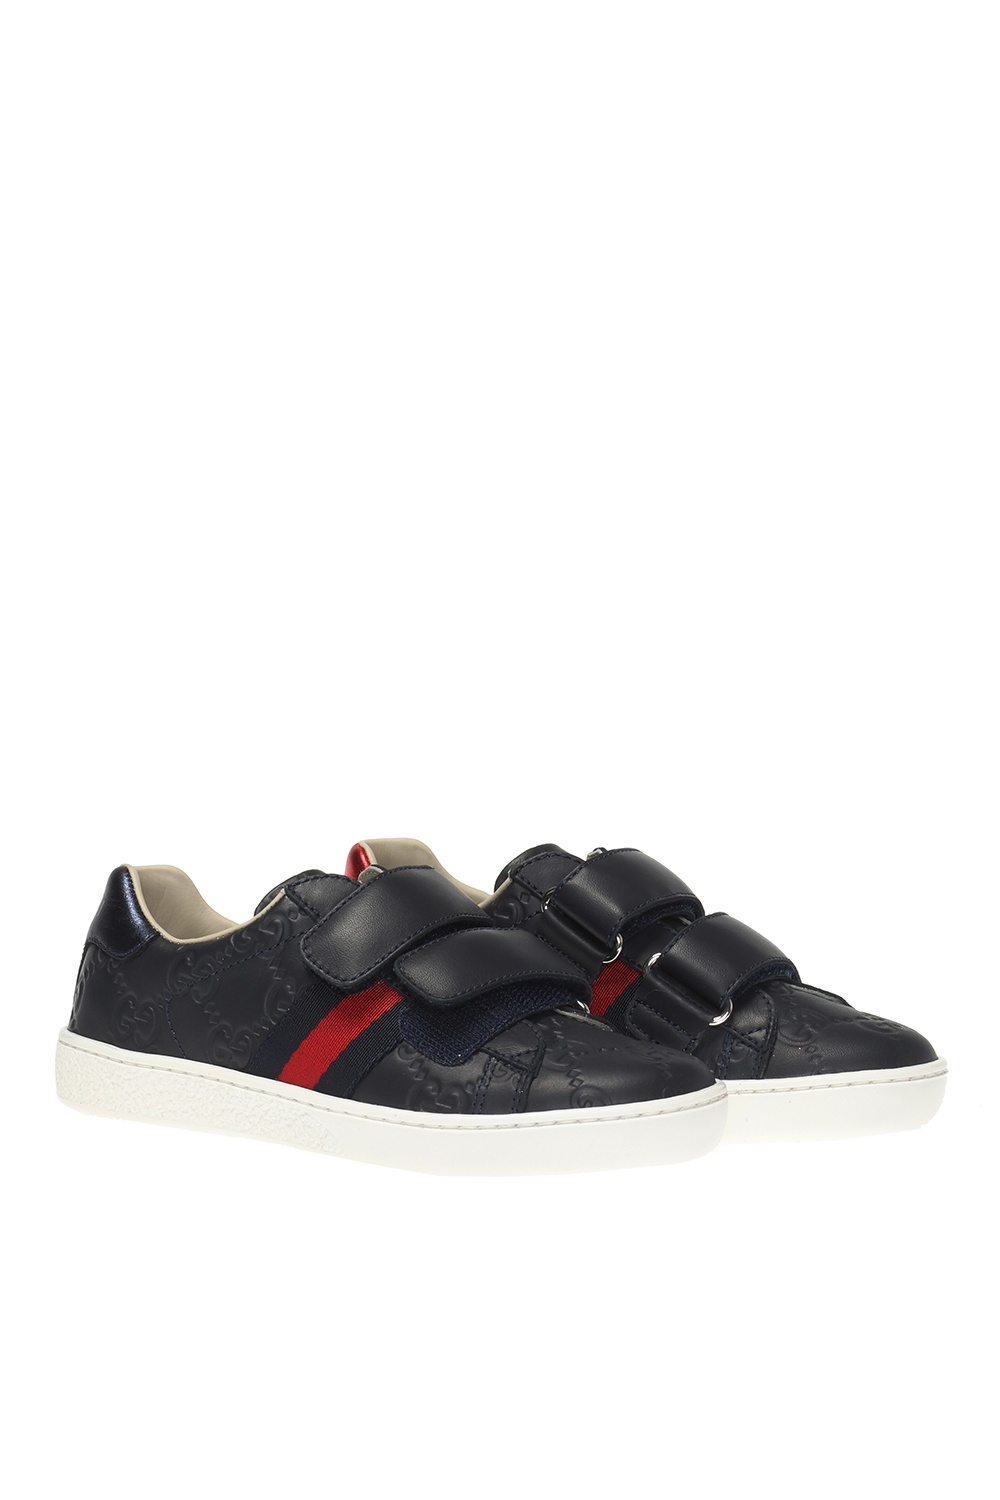 Gucci Kids 'Ace' sneakers